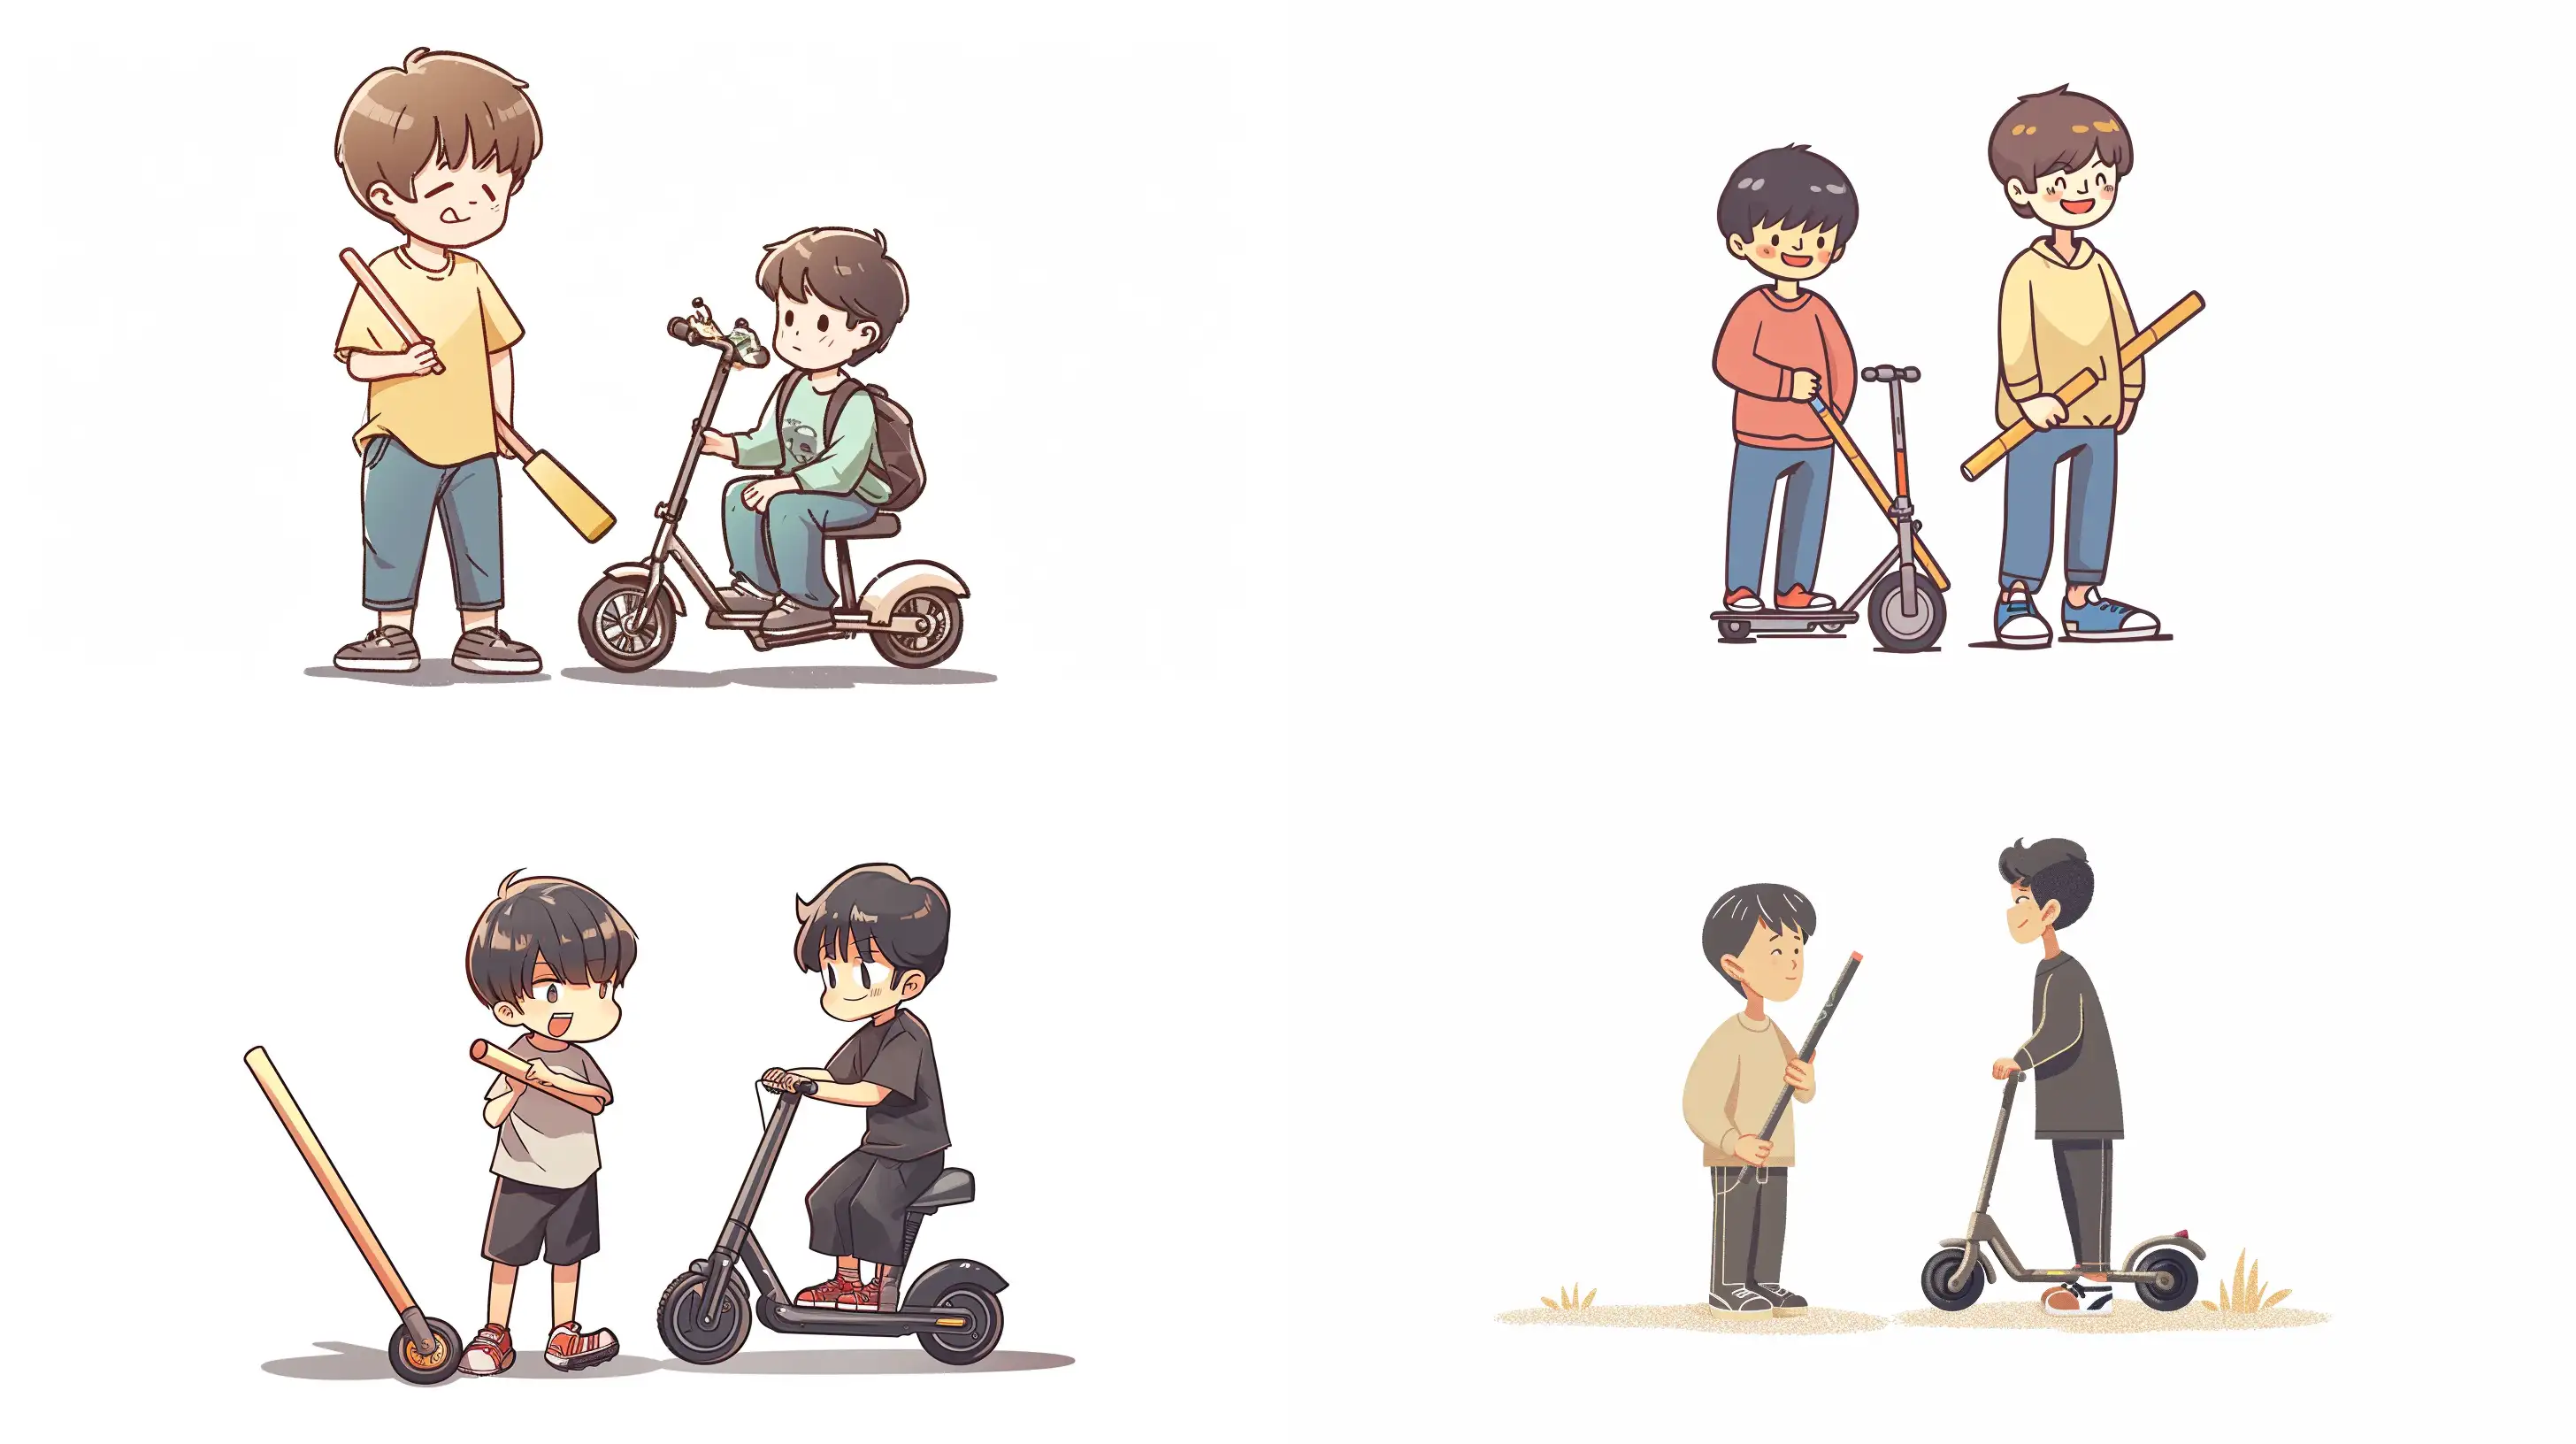 Anime-Style-Boys-with-Chalk-and-Scooter-Fun